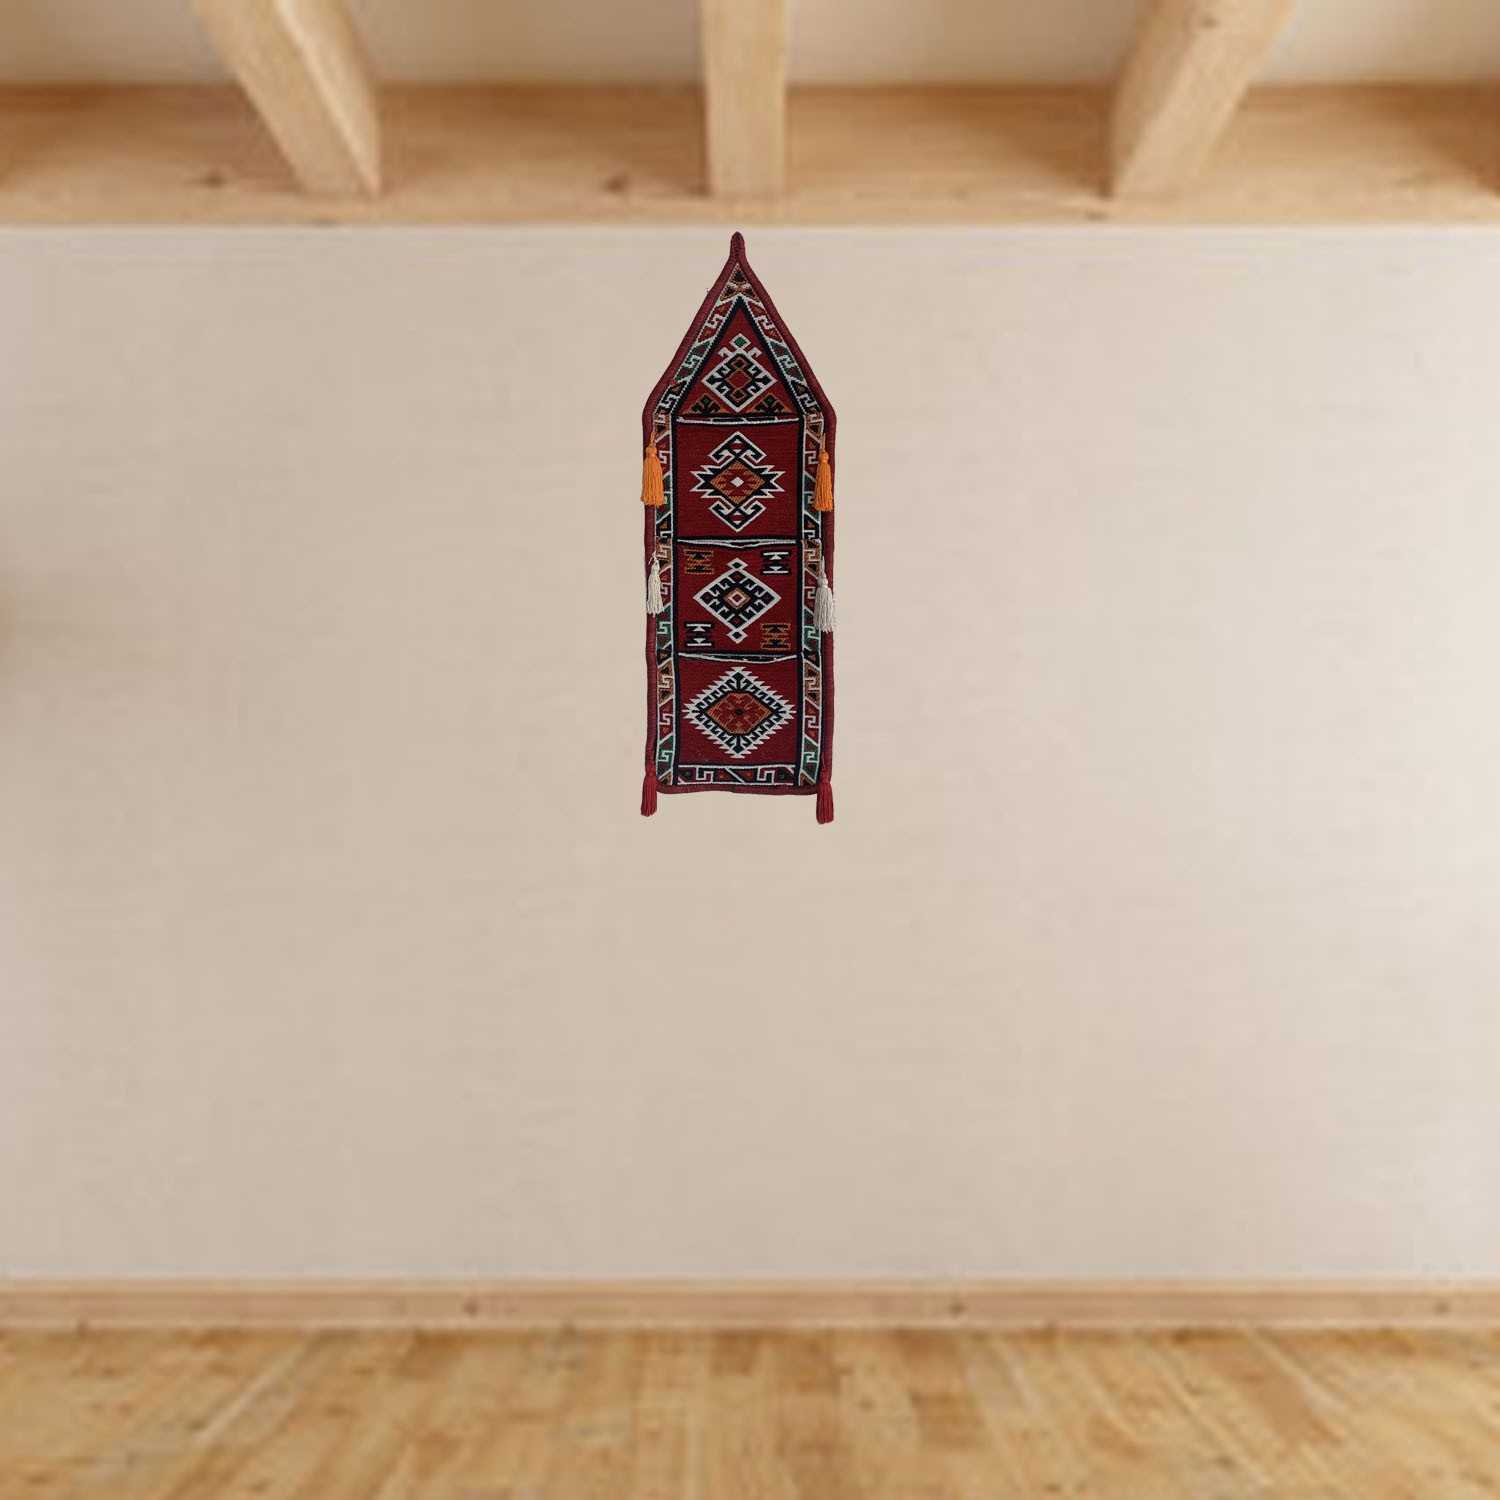 Bedouin style traditional kilim wall hanging